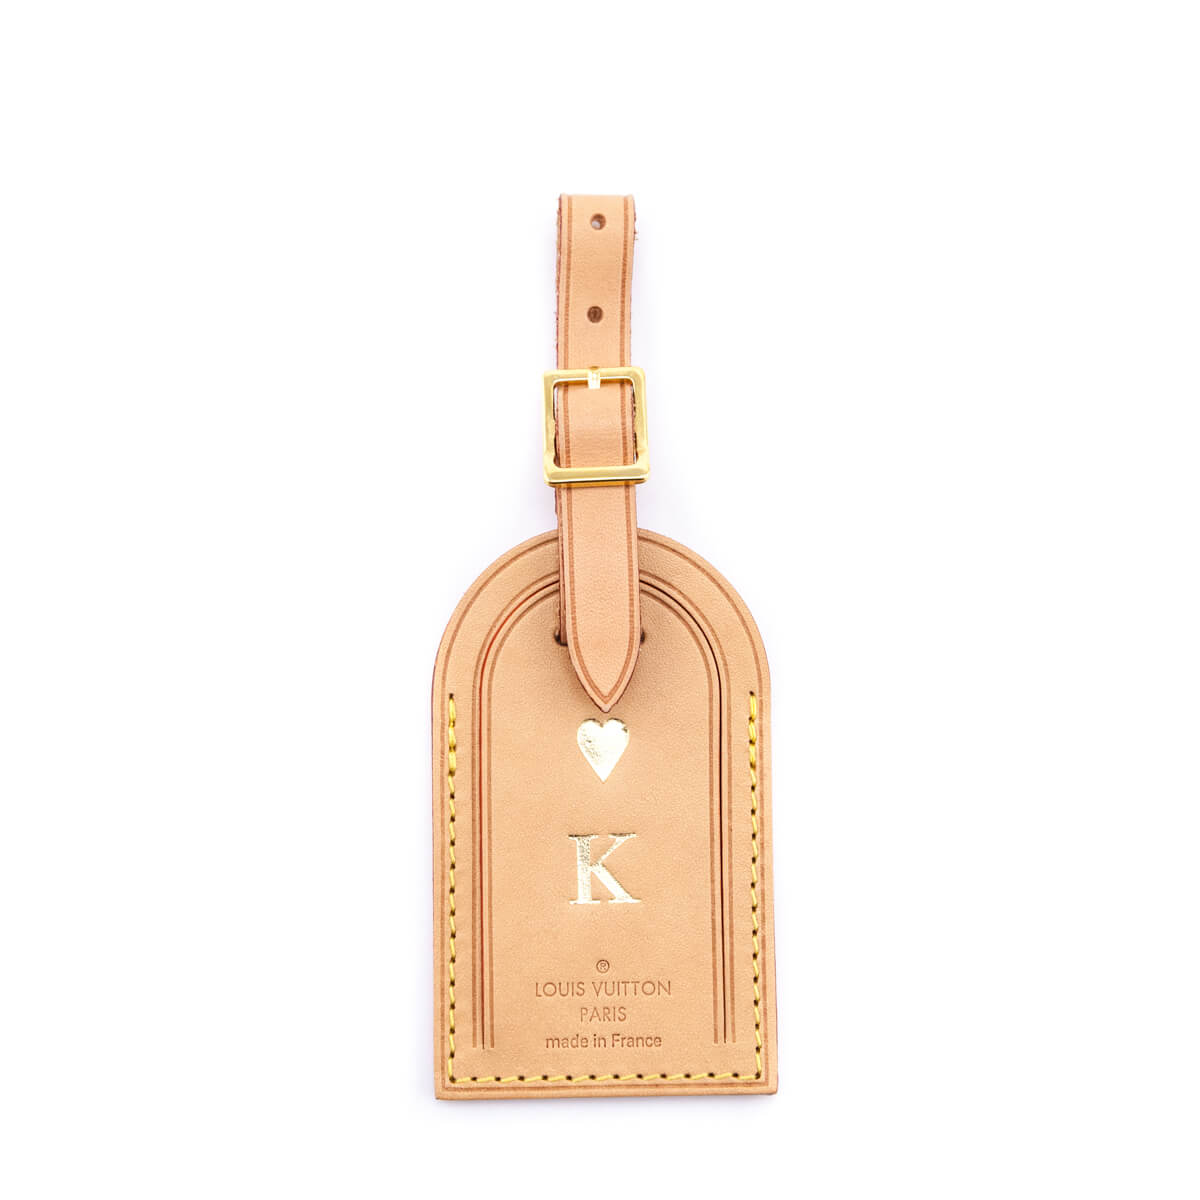 In LVoe with Louis Vuitton: The Louis Vuitton Luggage Tag